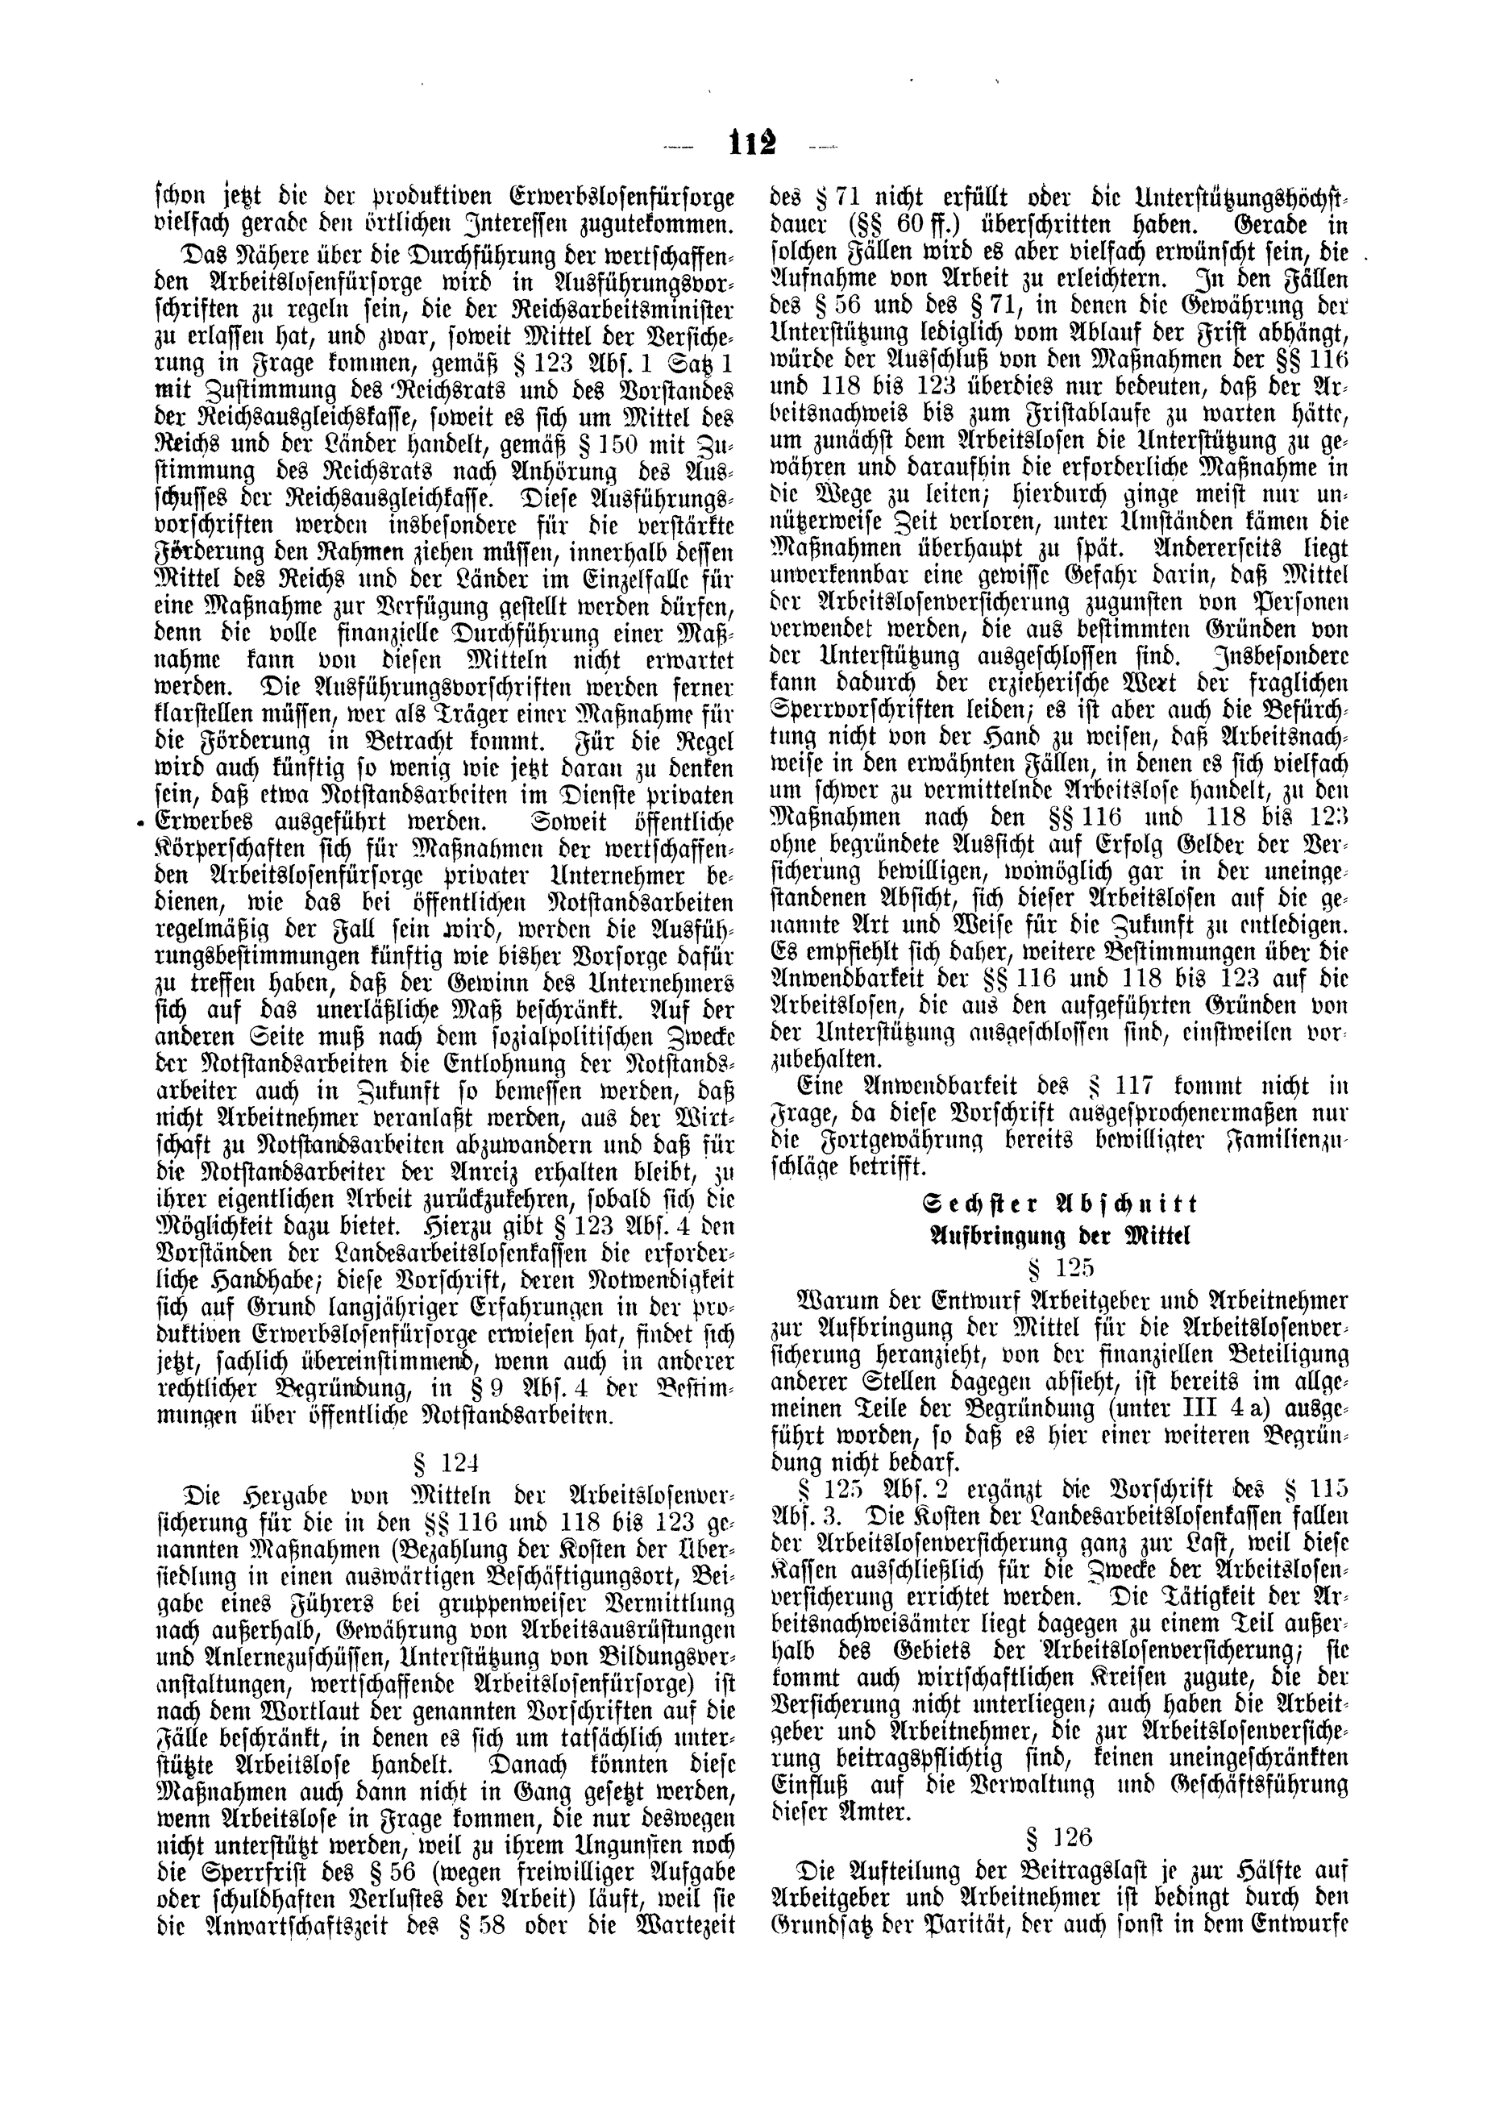 Scan of page 112